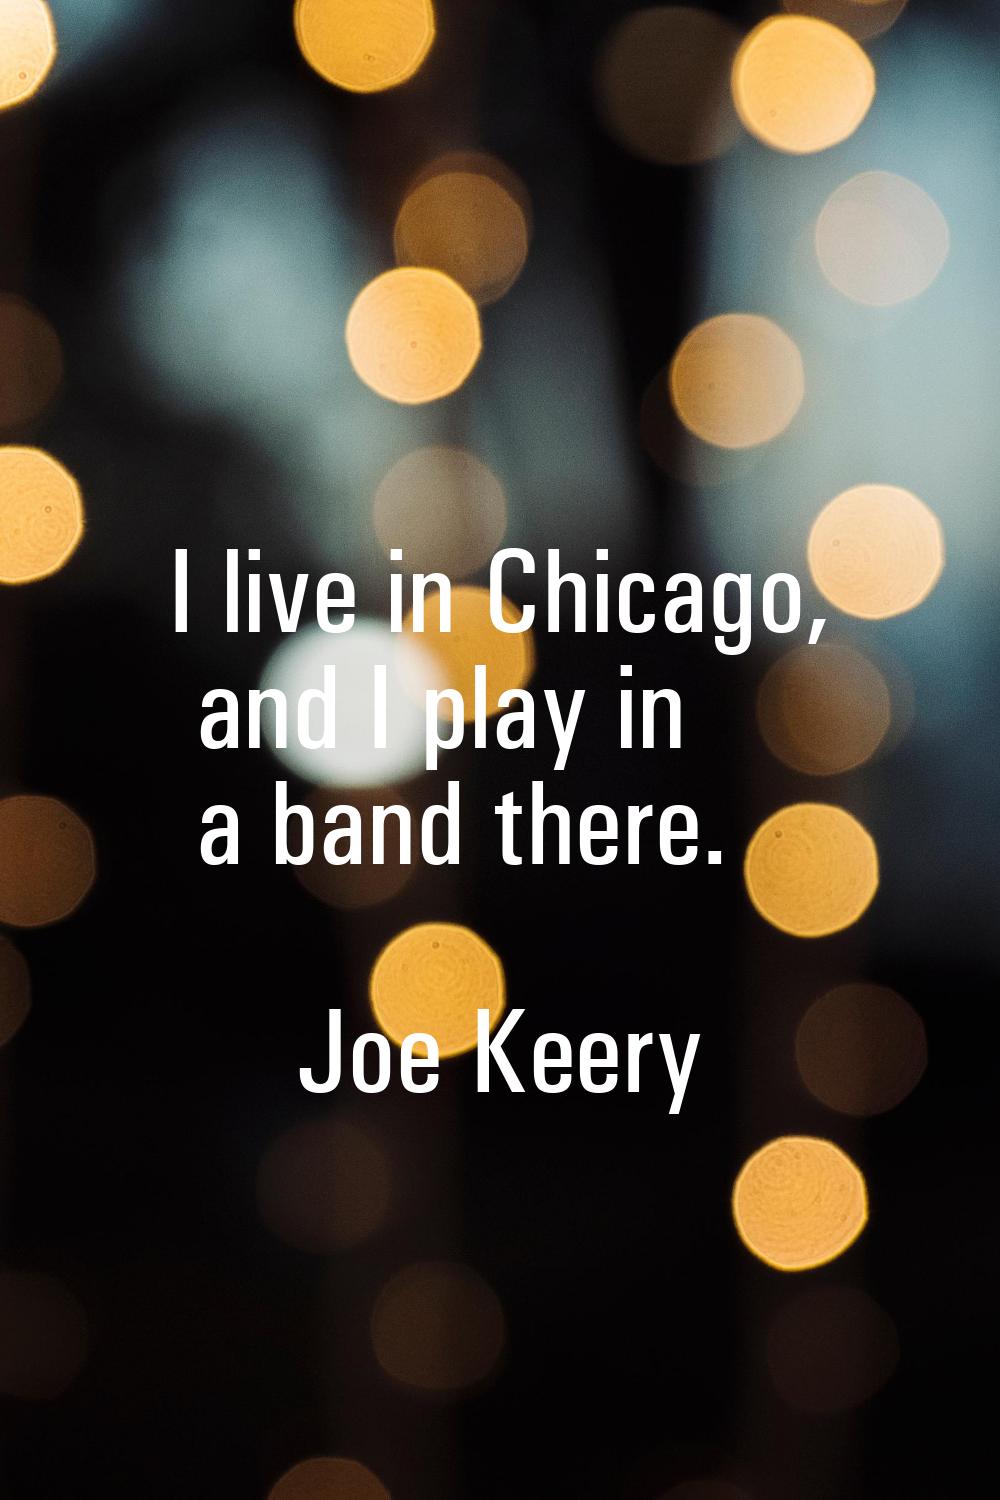 I live in Chicago, and I play in a band there.